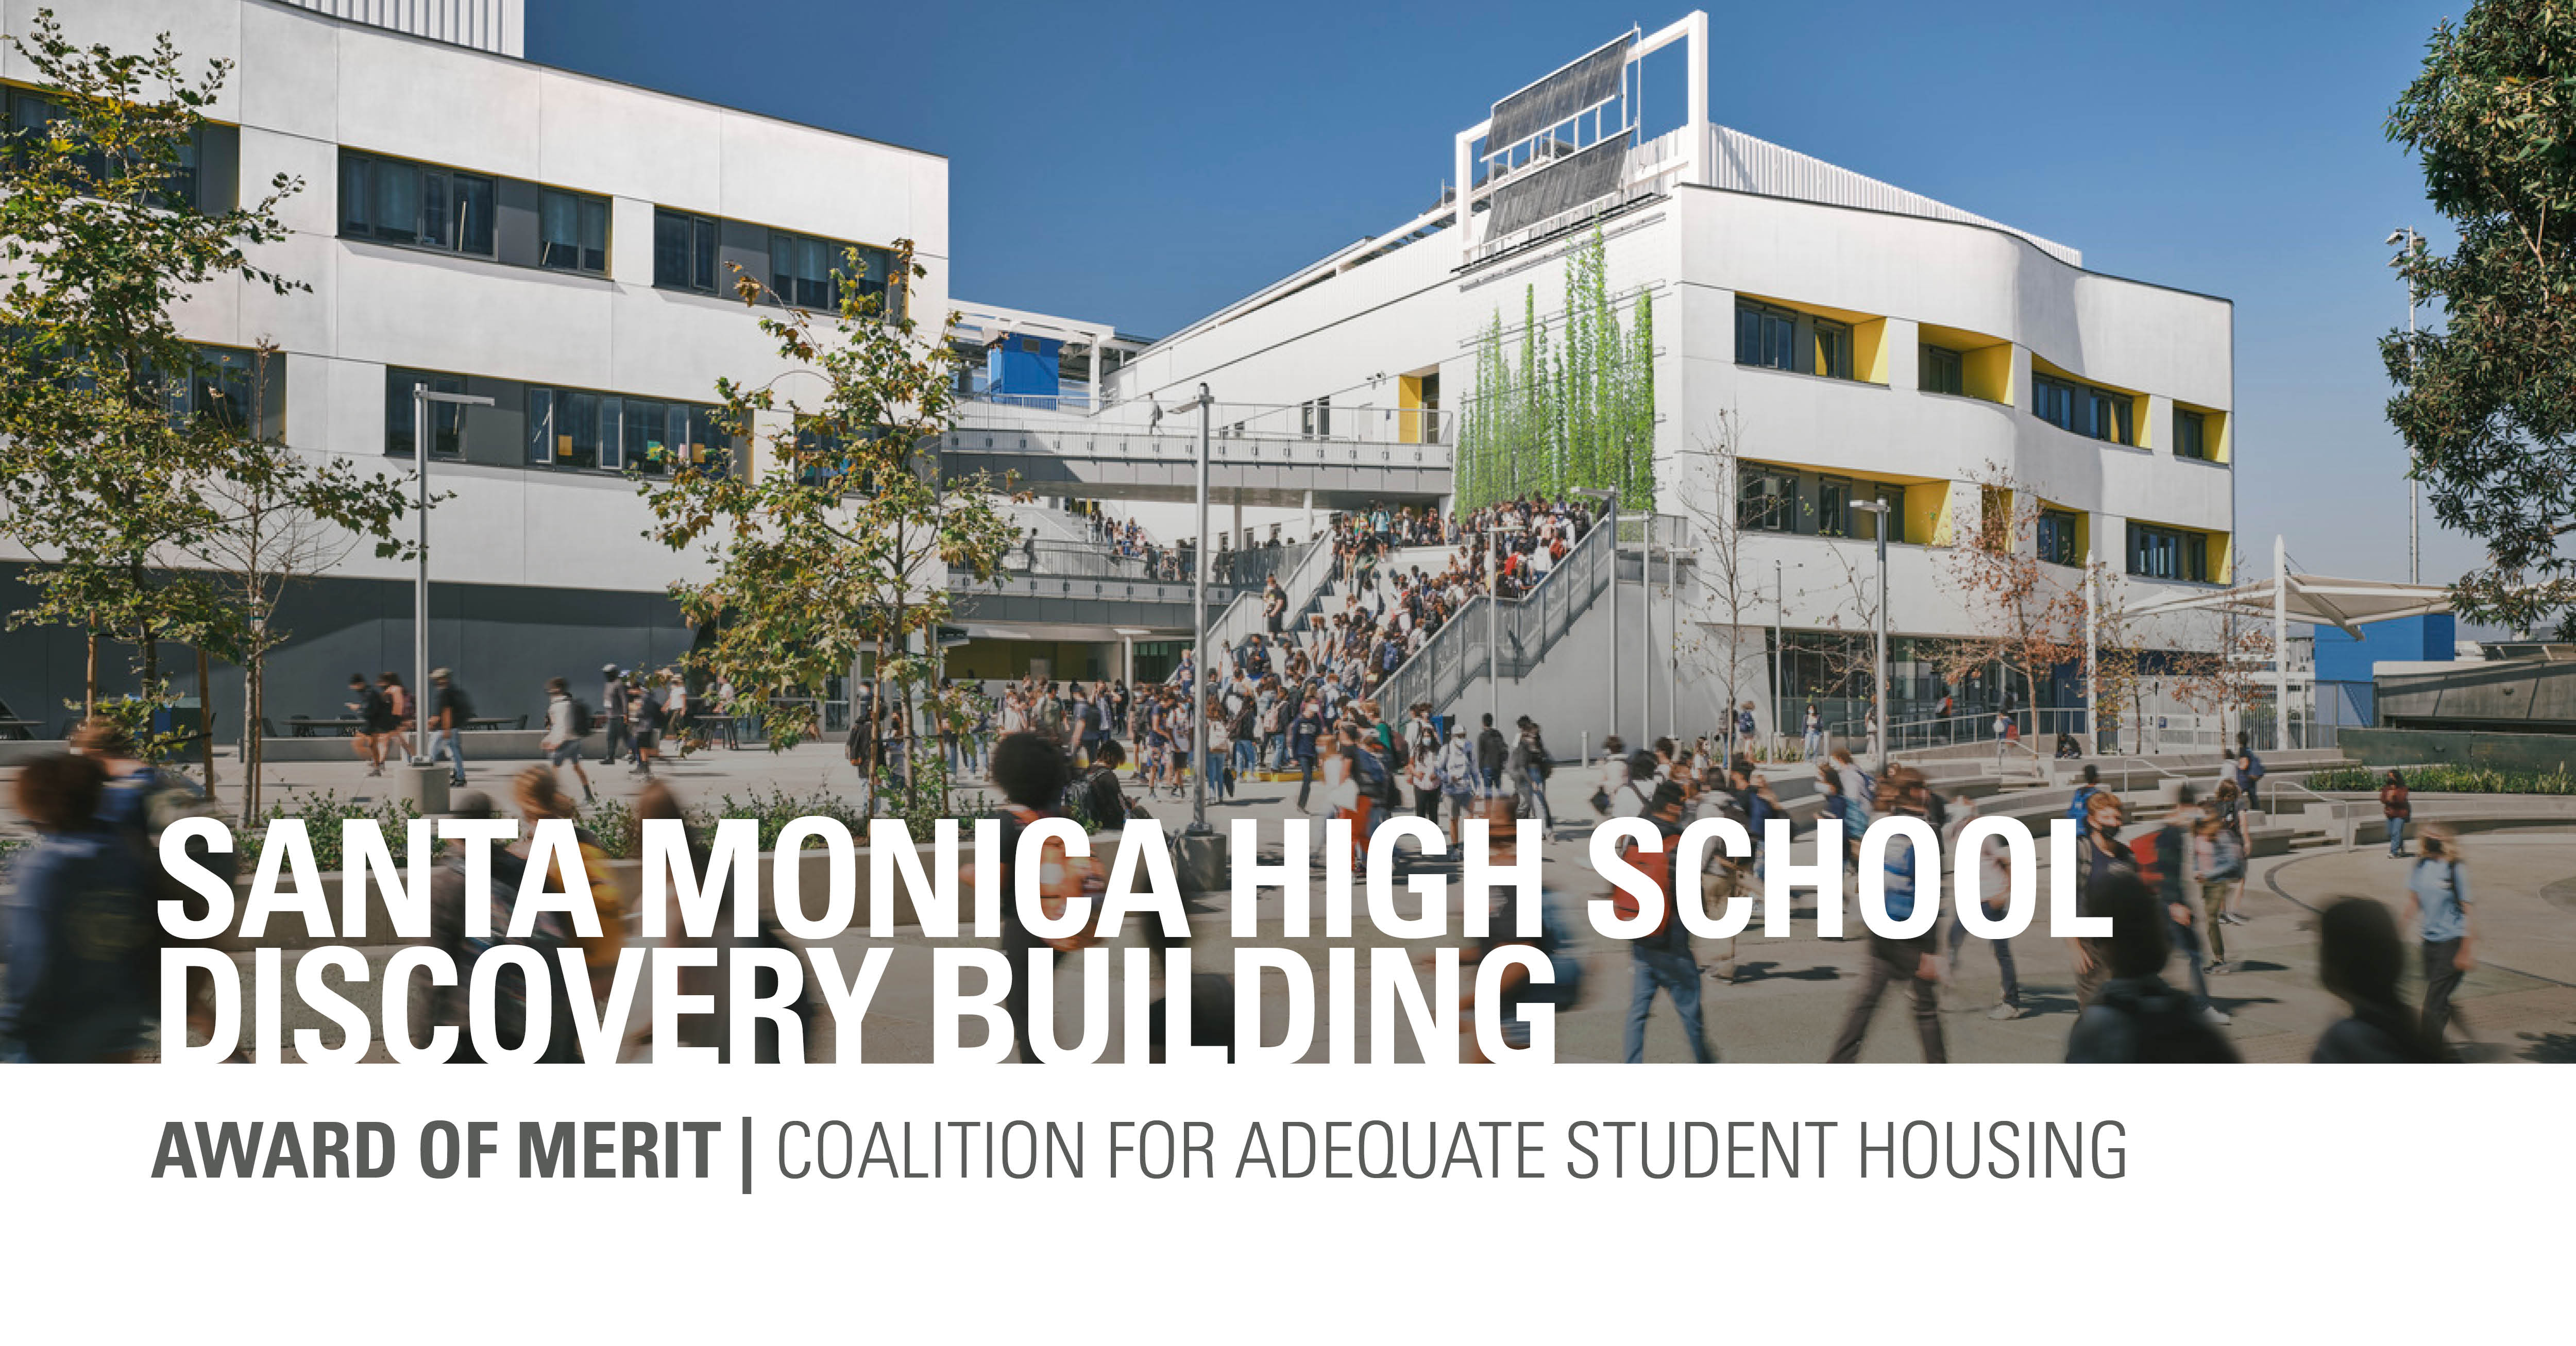 /Photo%20of%20Santa%20Monica%20High%20School%20with%20text%20below%20saying%20Award%20of%20Merit%20%7C%20Coalition%20for%20Adequate%20Student%20Housing